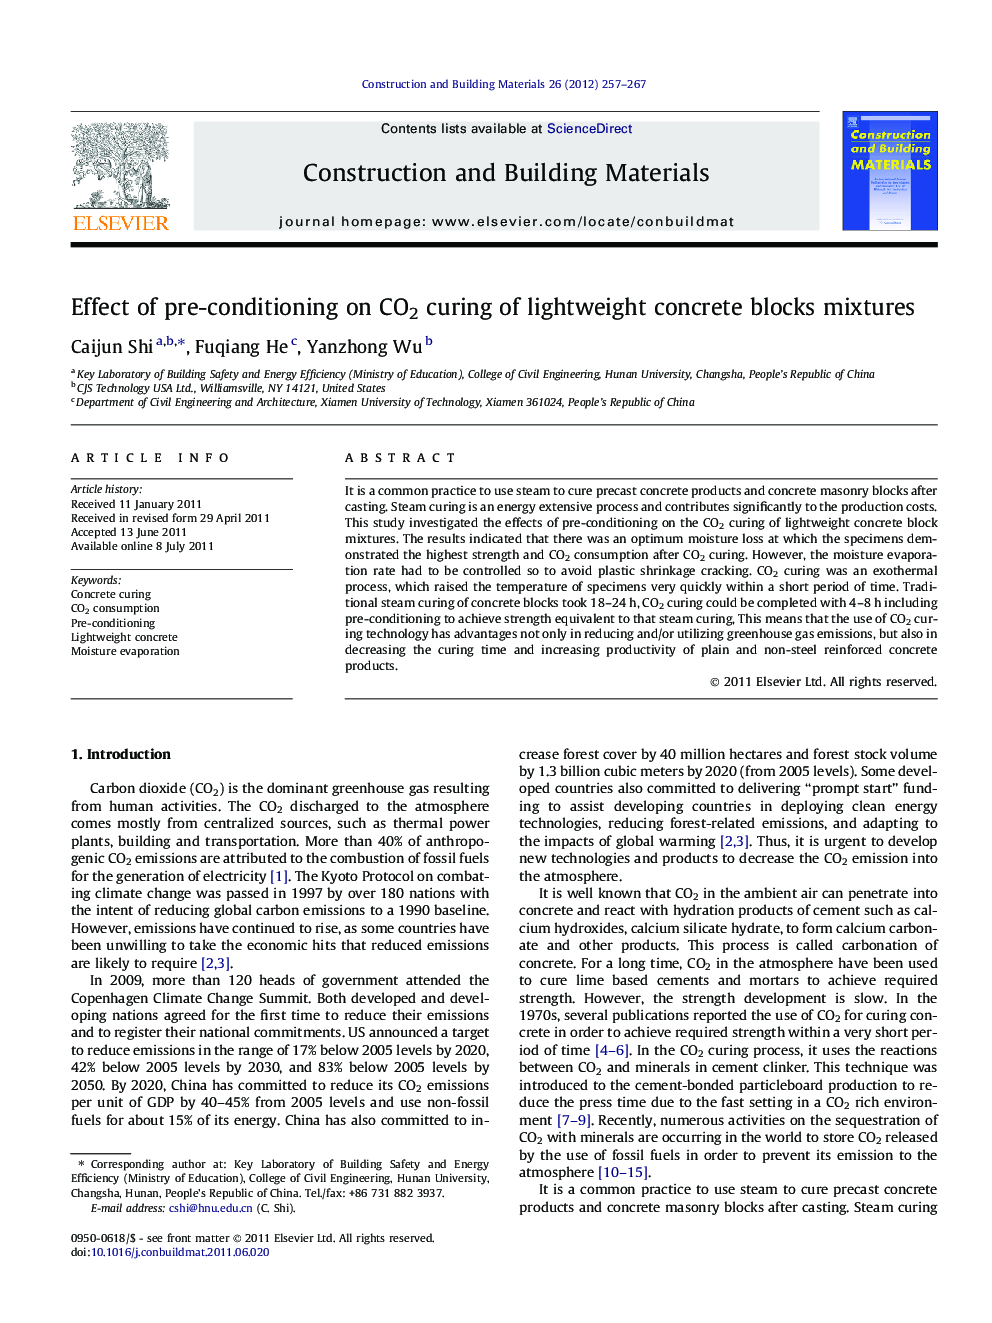 Effect of pre-conditioning on CO2 curing of lightweight concrete blocks mixtures